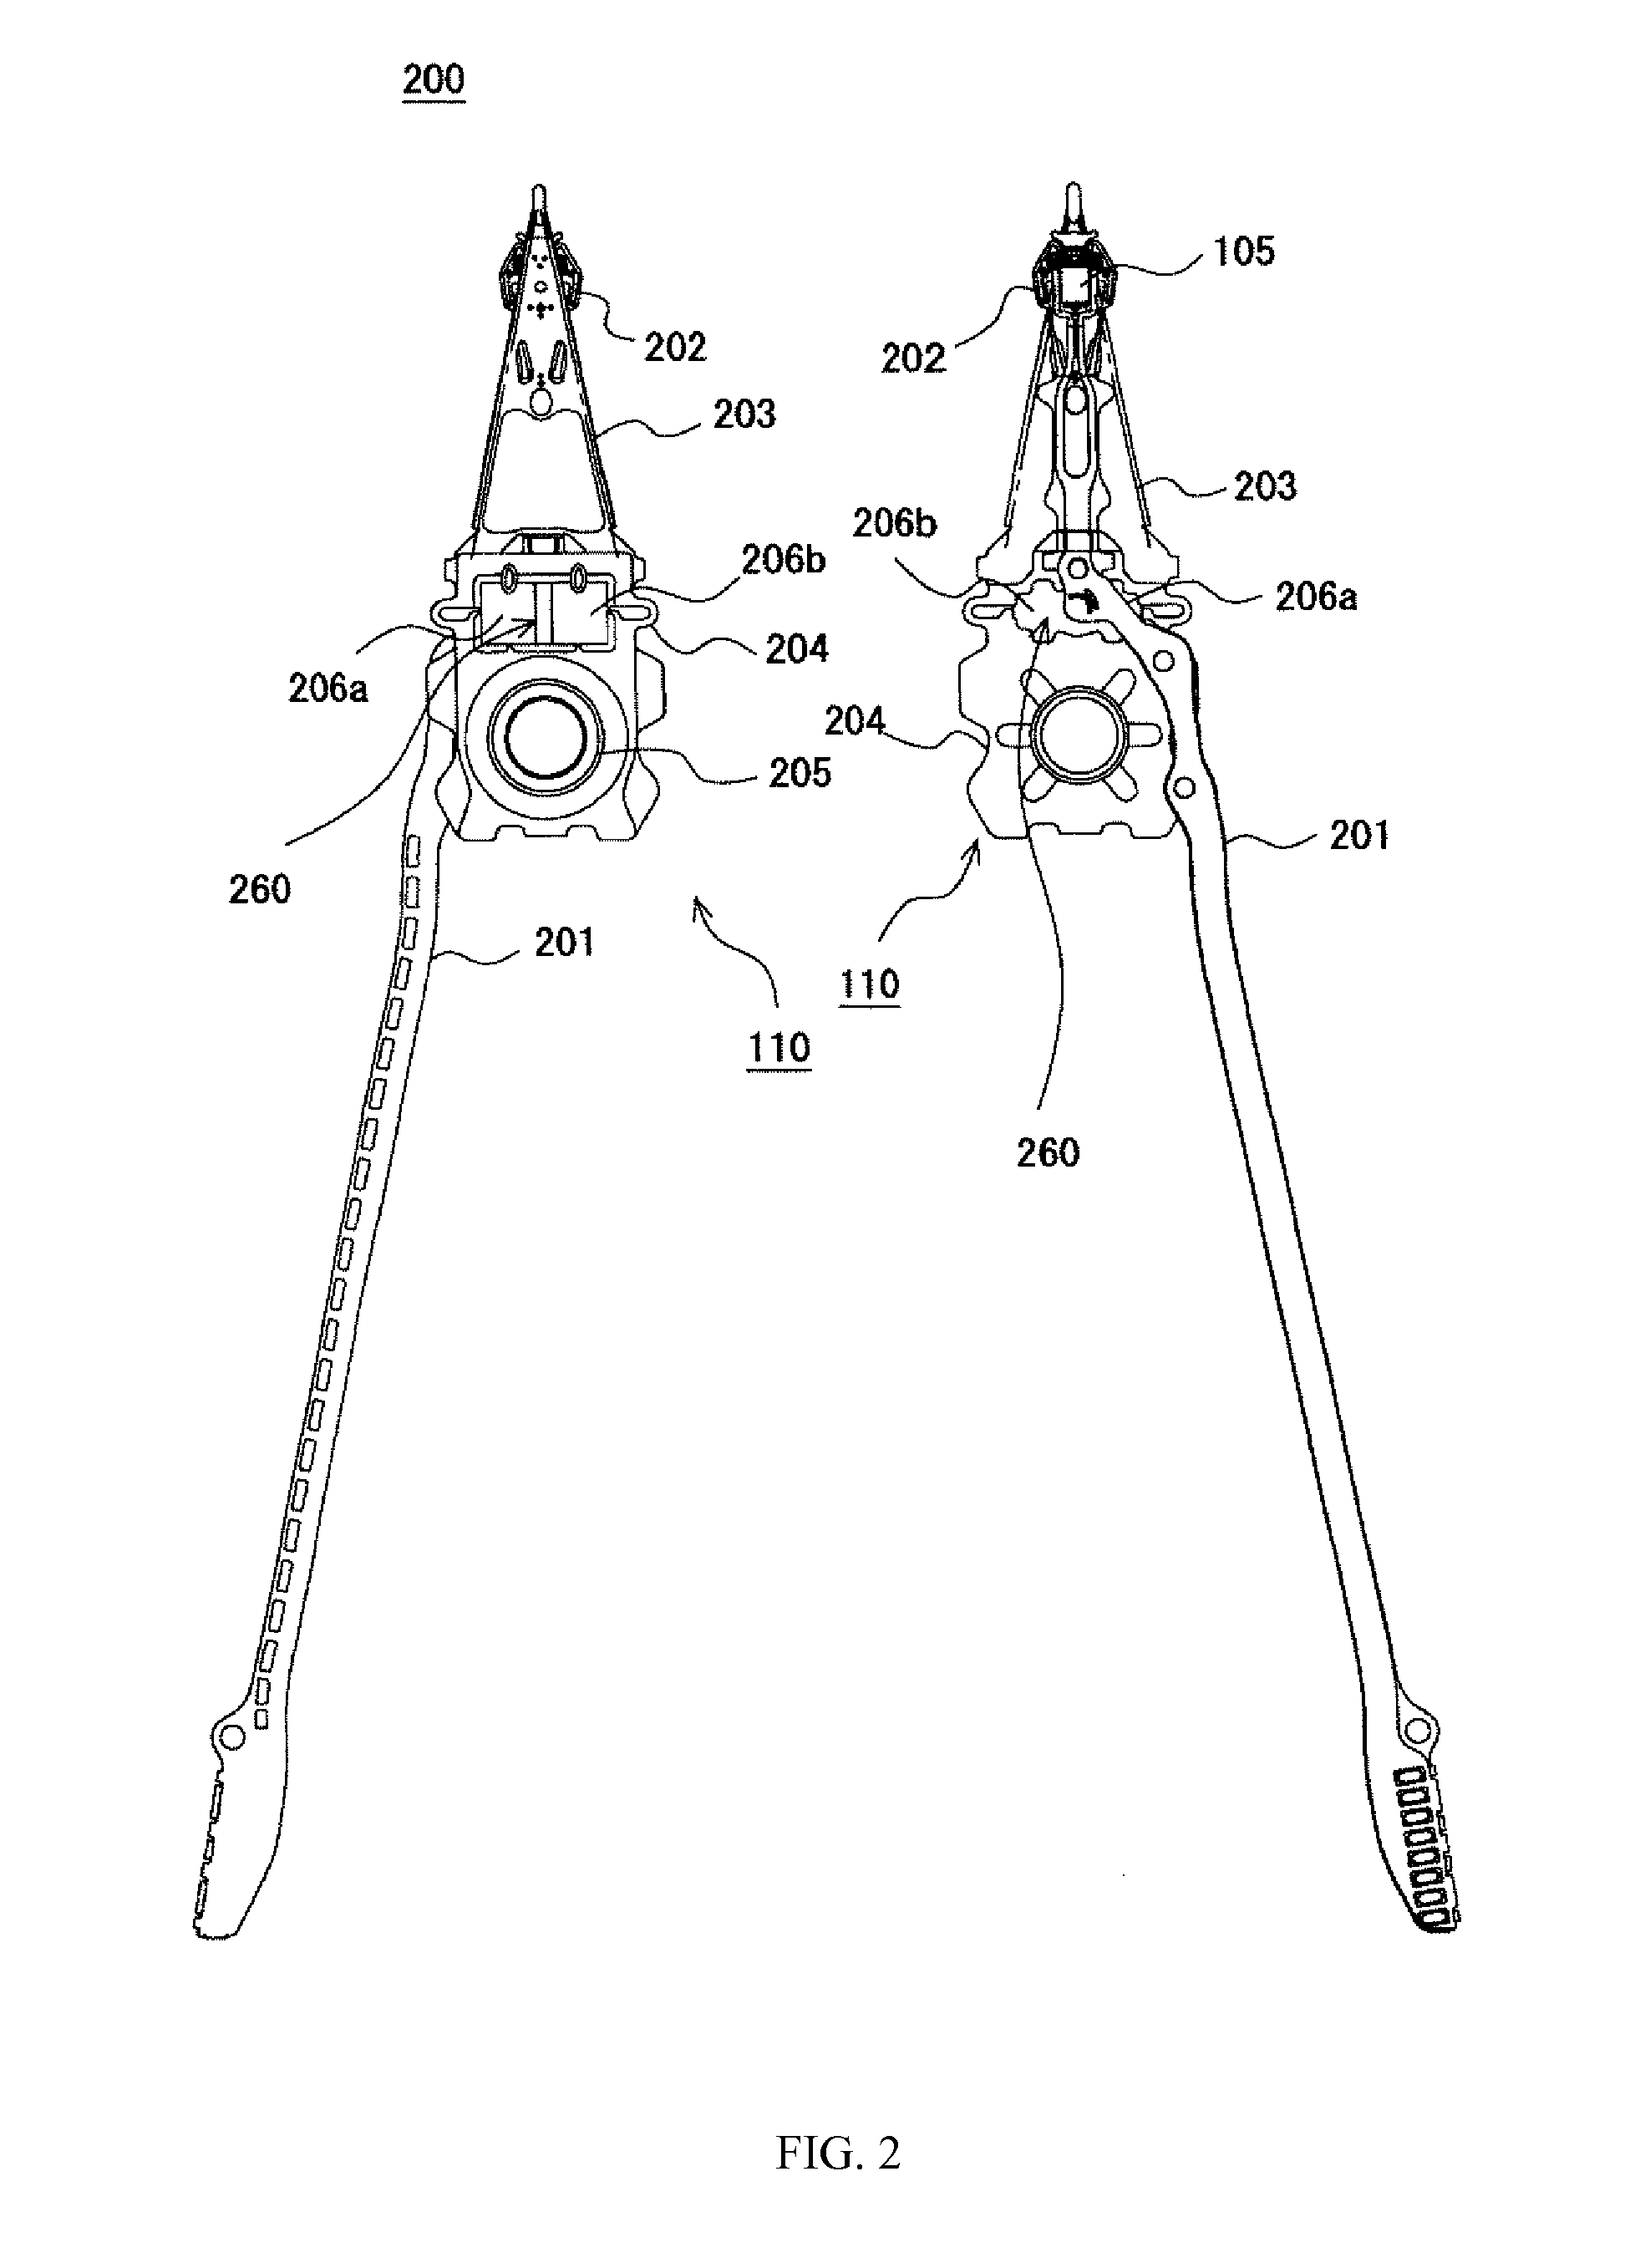 Disk drive with micro-actuator interconnect conditioning